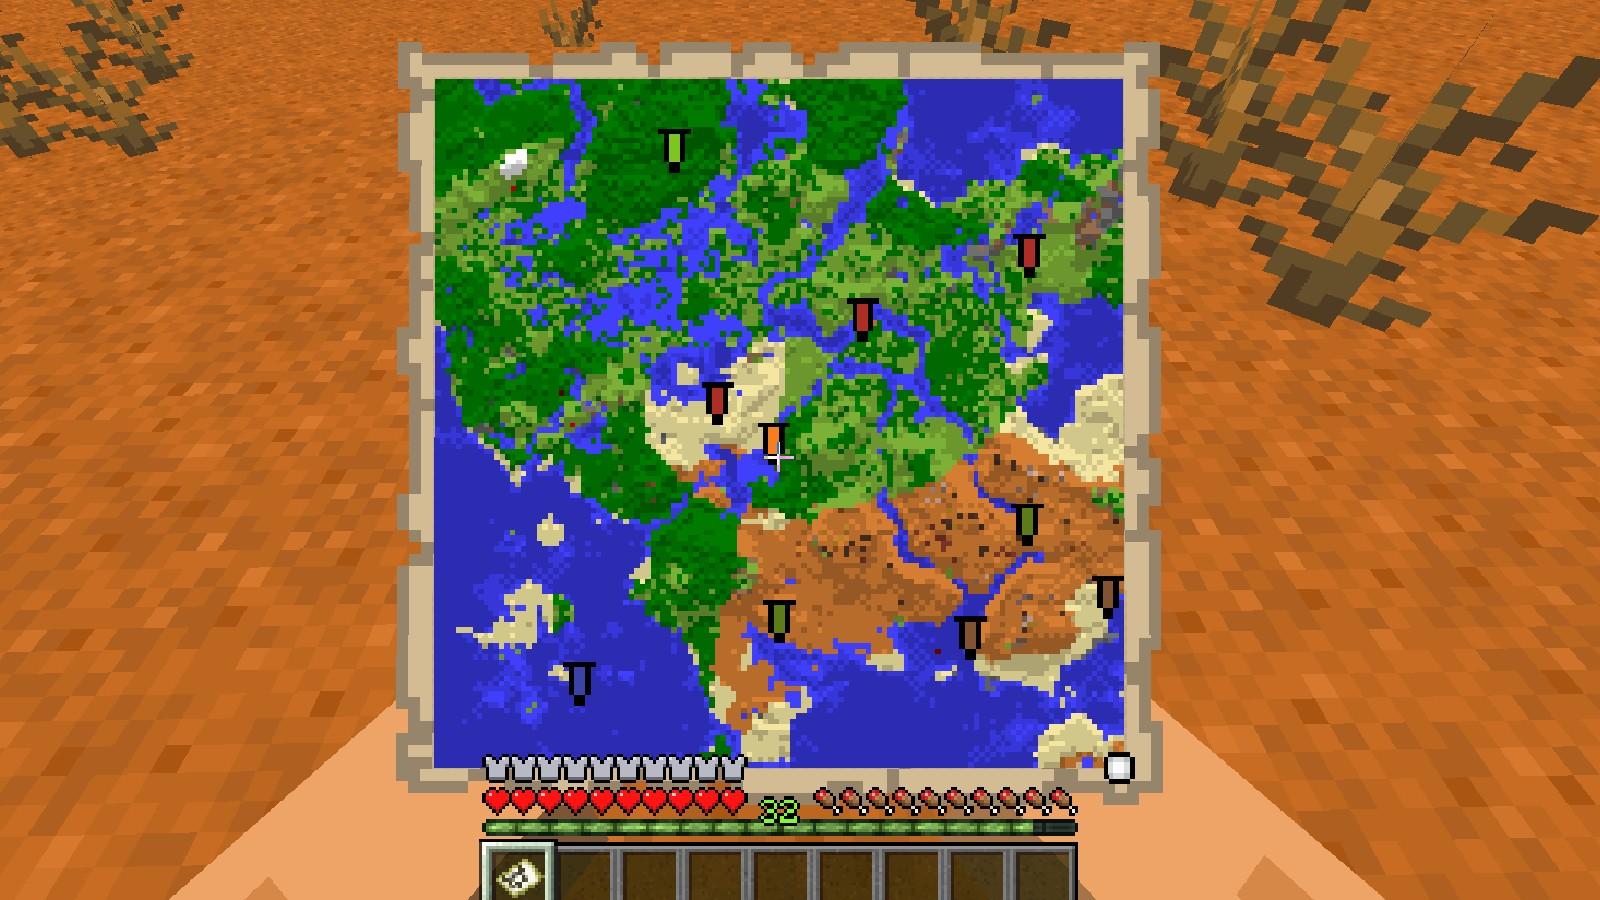 I created a mini Minecraft world based off many other designs here